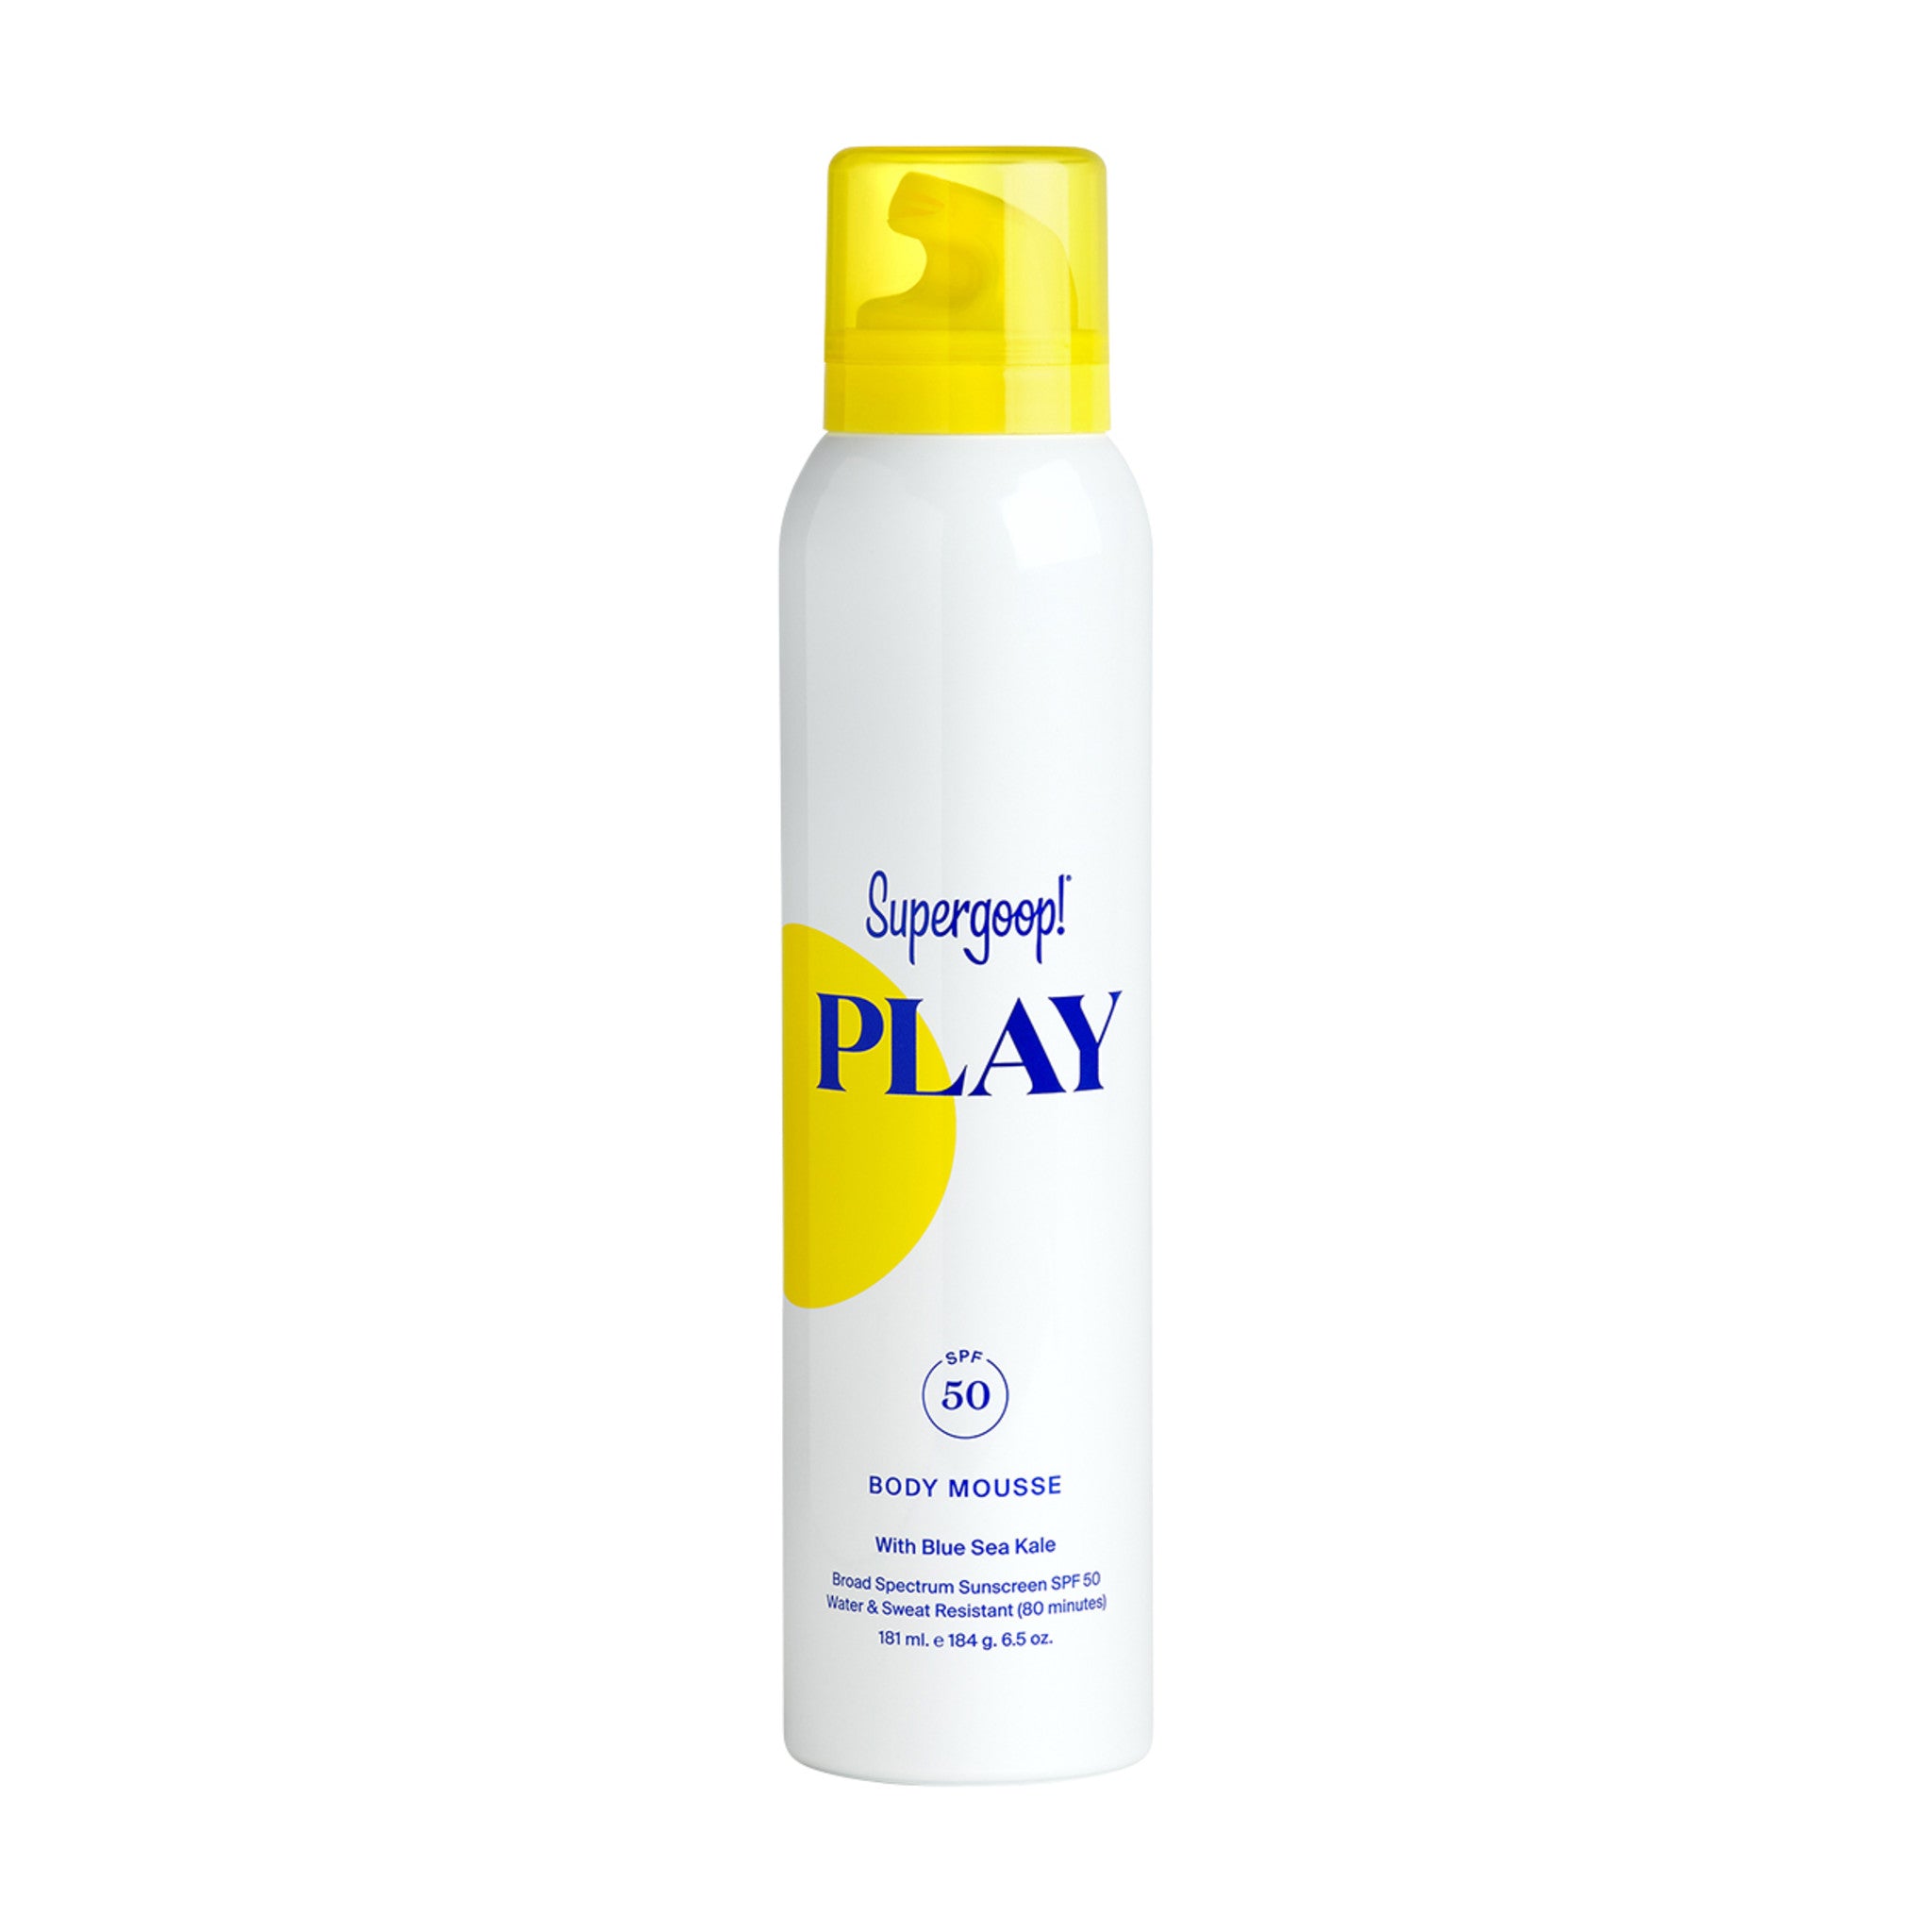 Supergoop! Play Body Mousse With Blue Sea Kale SPF 50 Size variant: 6.5 oz main image.